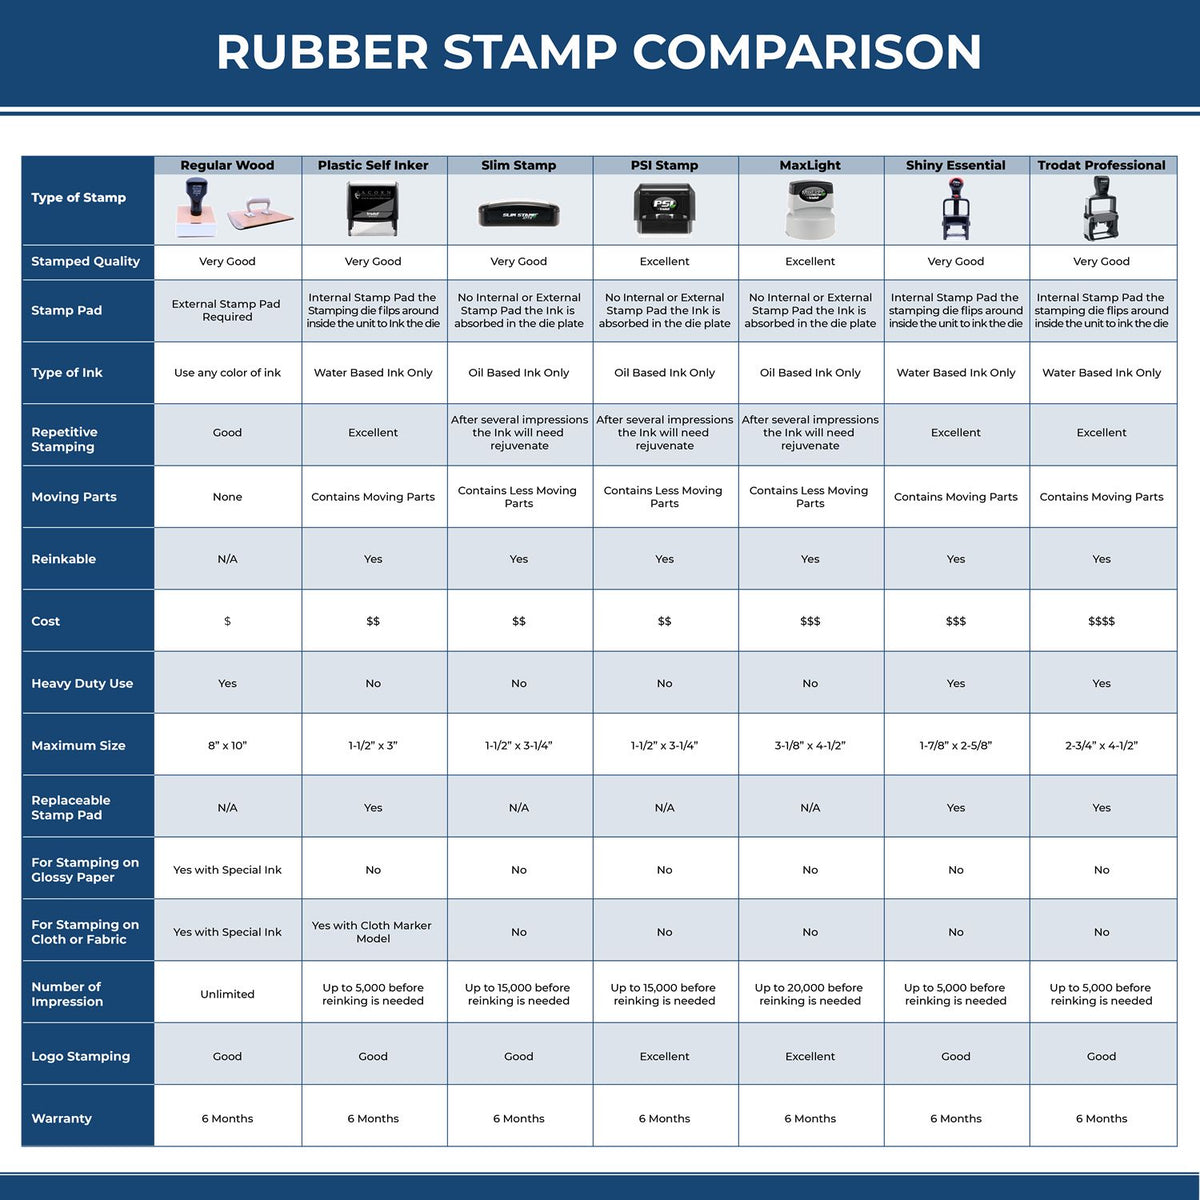 A comparison chart for the different types of mount models available for the Premium MaxLight Pre-Inked California Engineering Stamp.